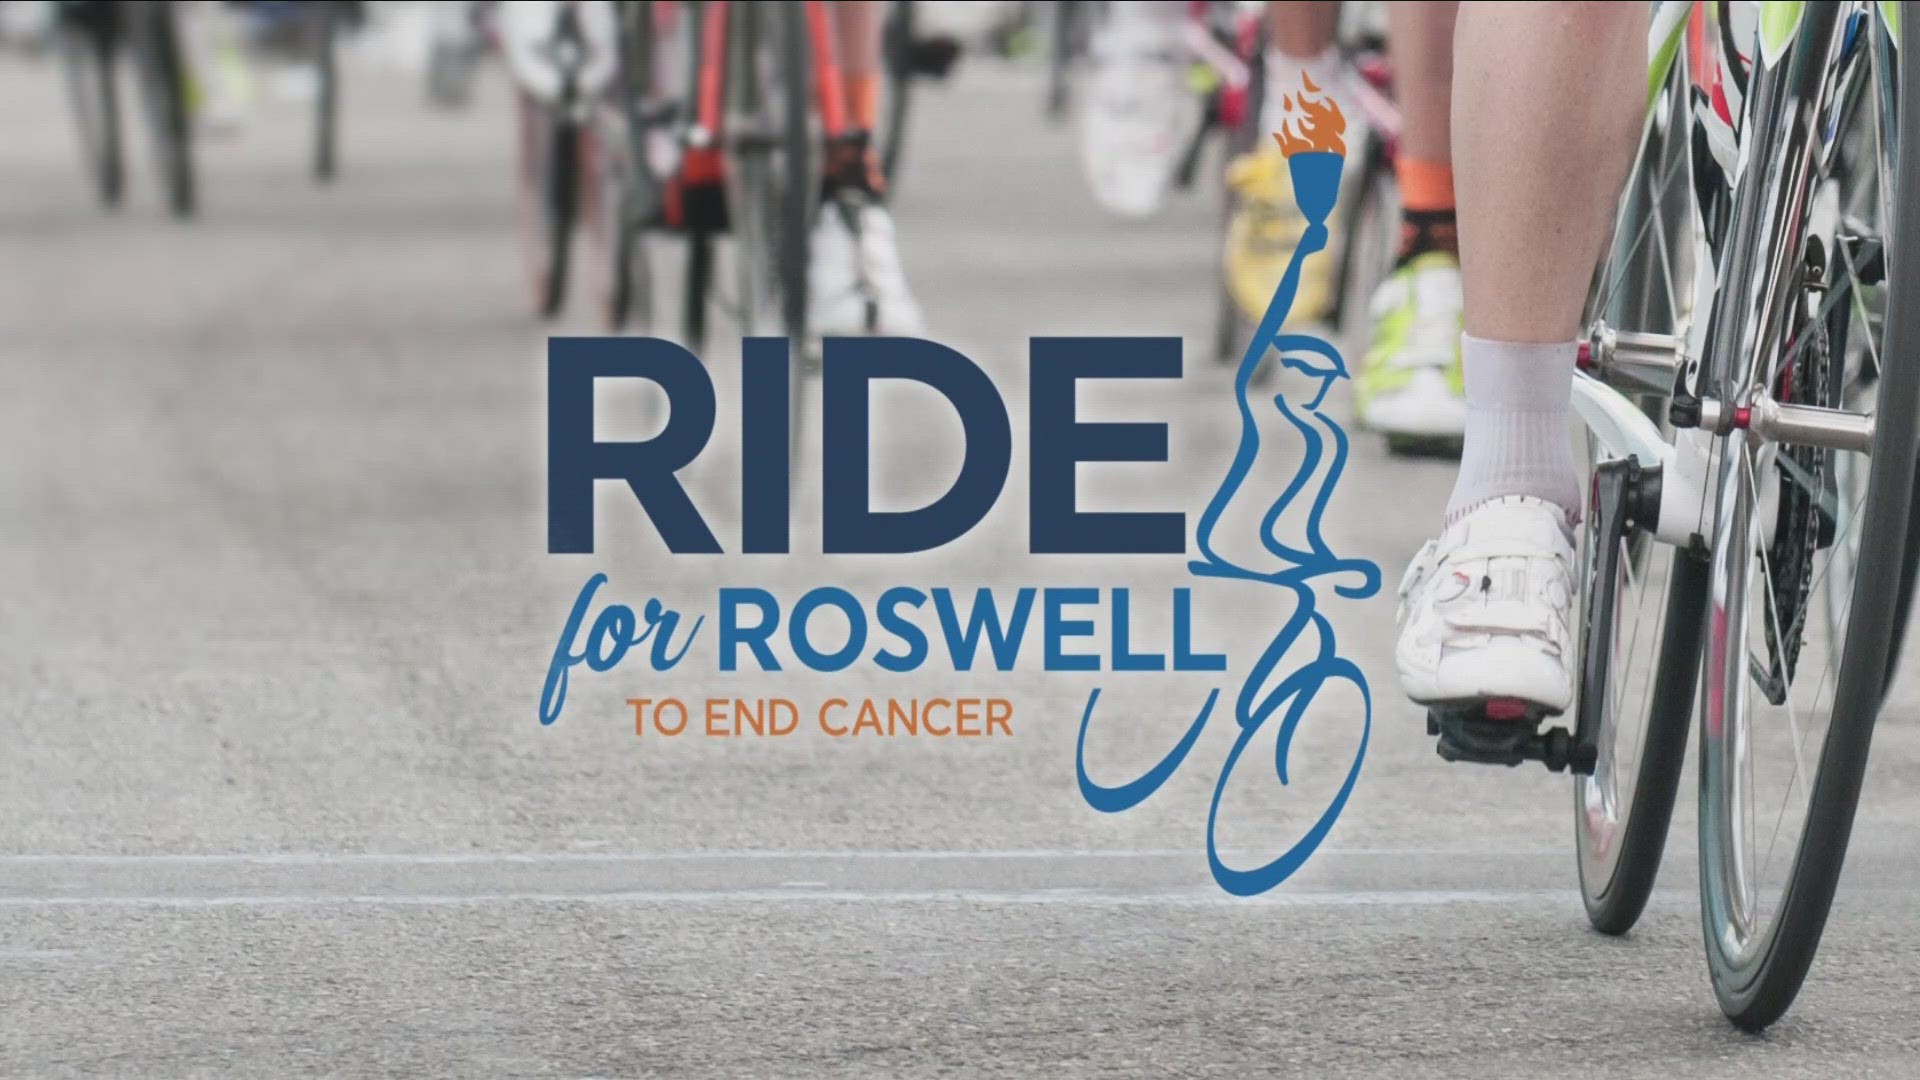 This is the 29th year of the Ride for Roswell fundraiser